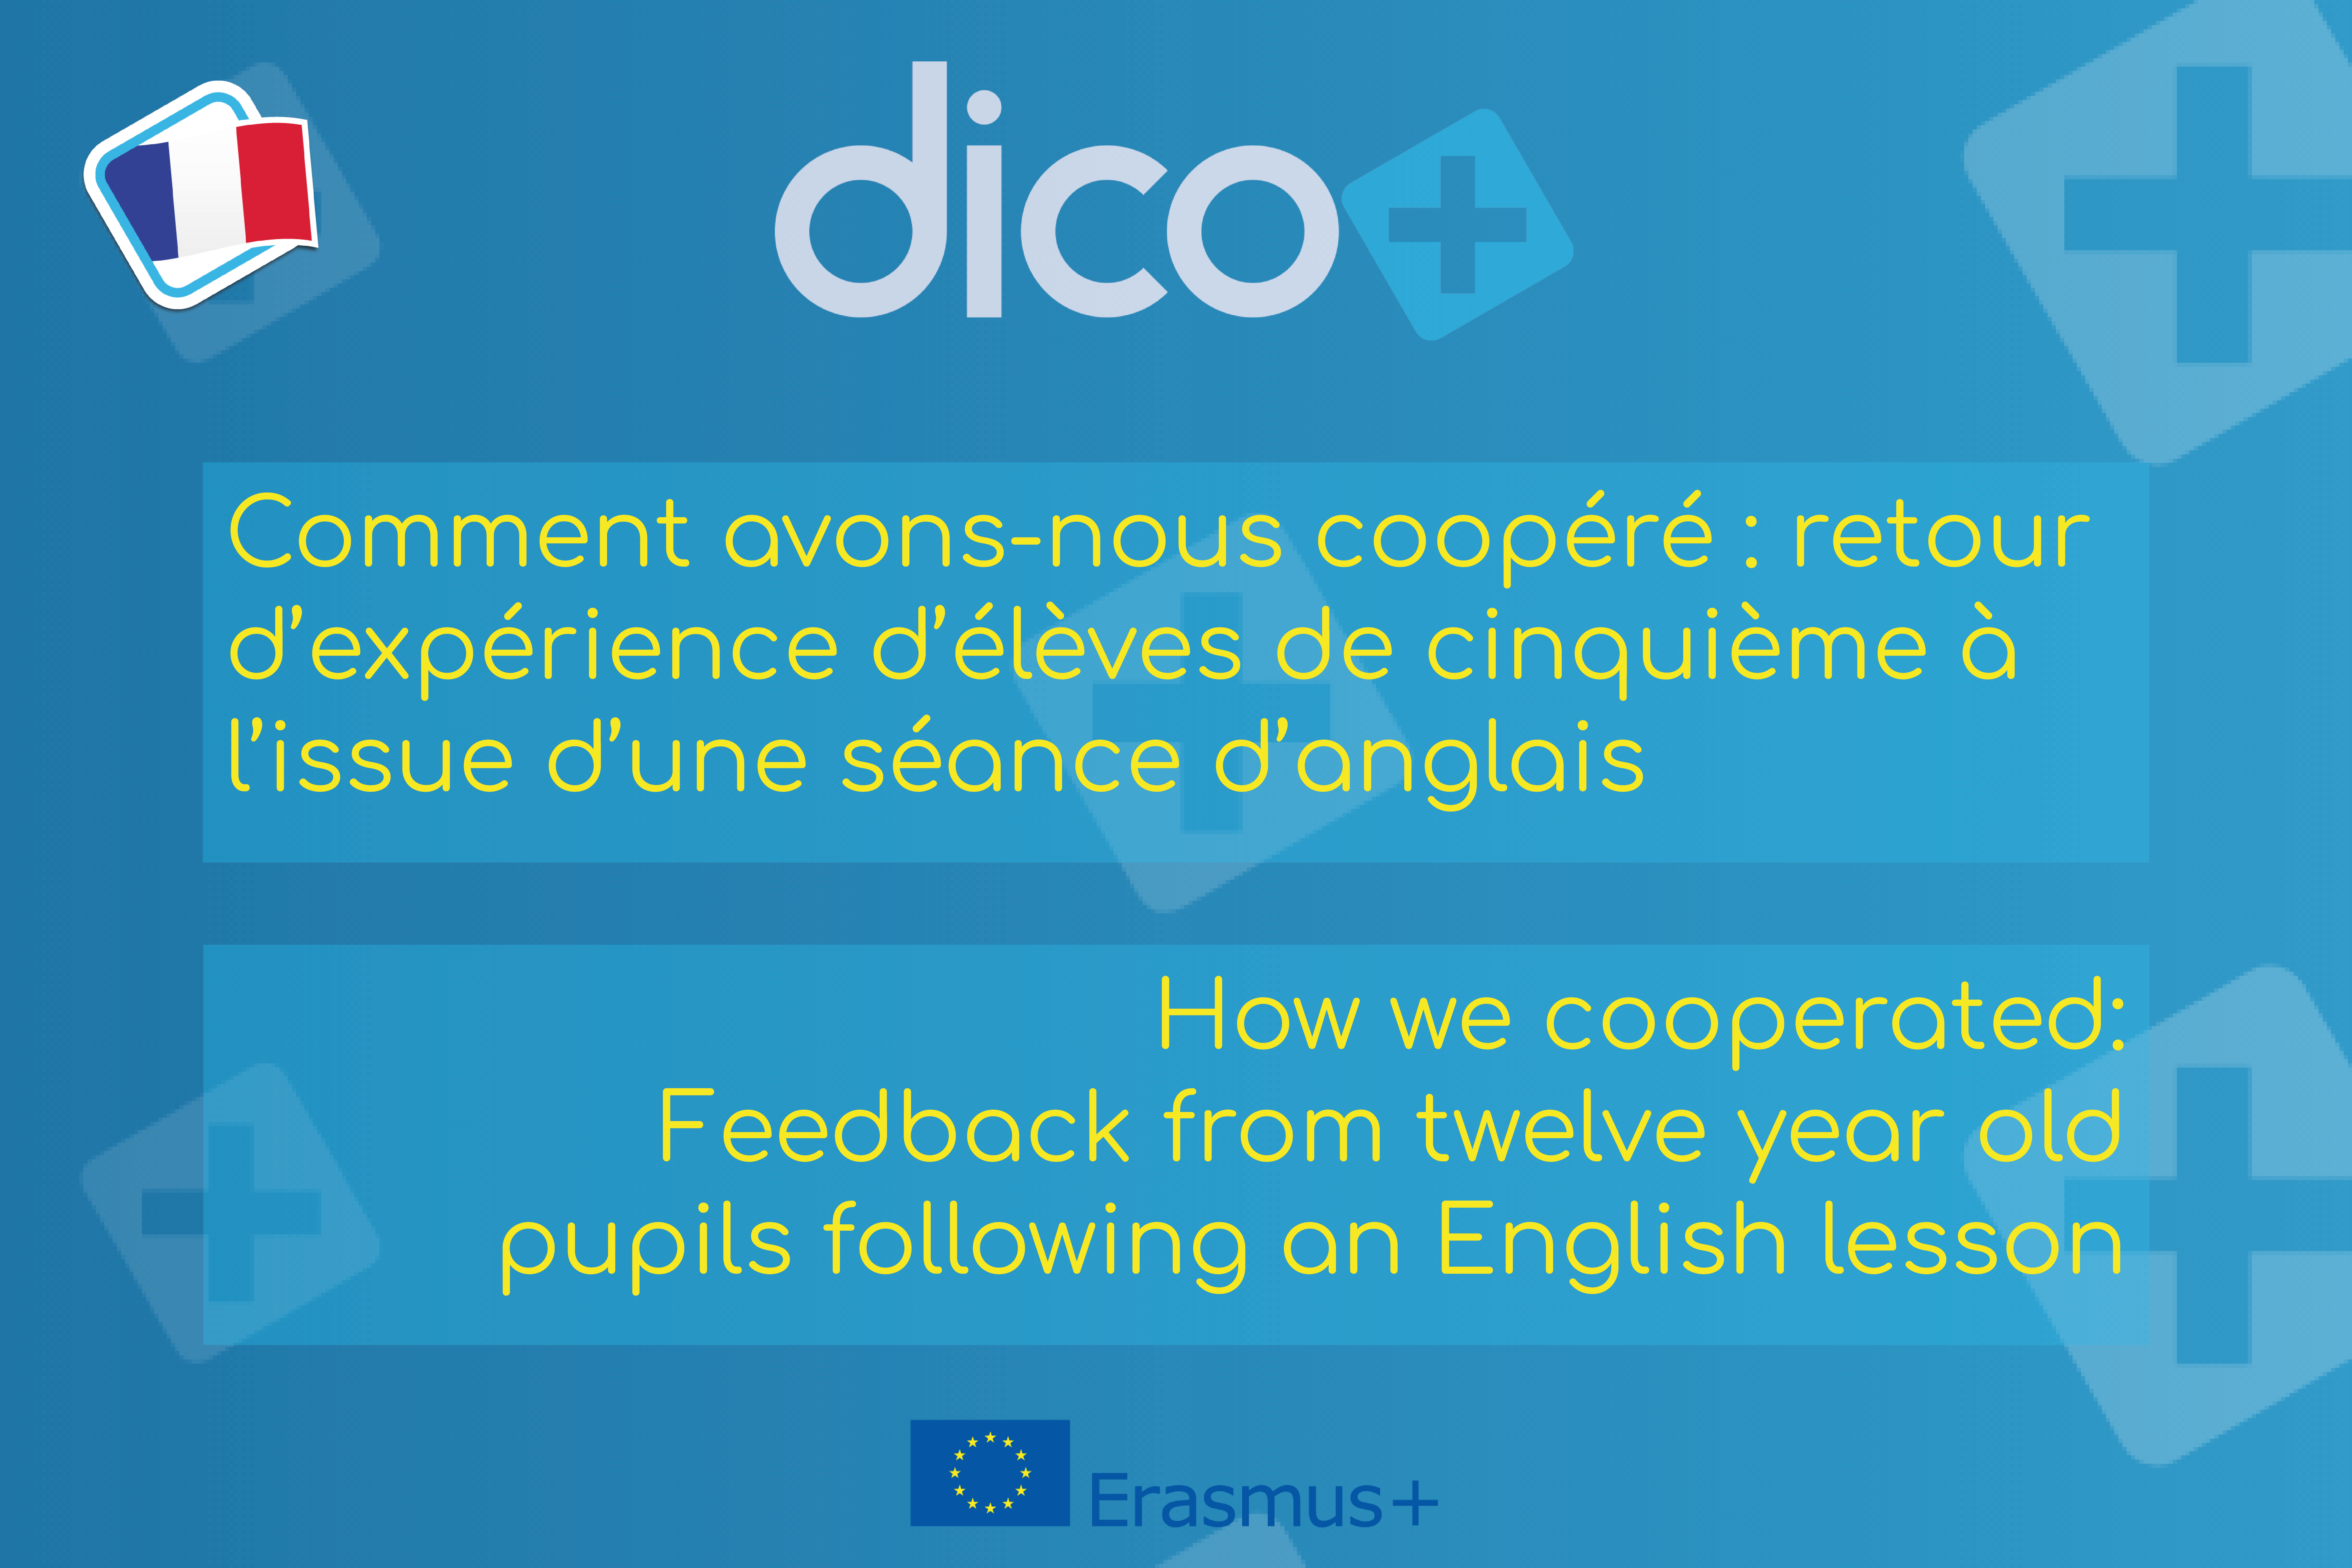 How we cooperated: Feedback from twelve year old pupils following an English lesson